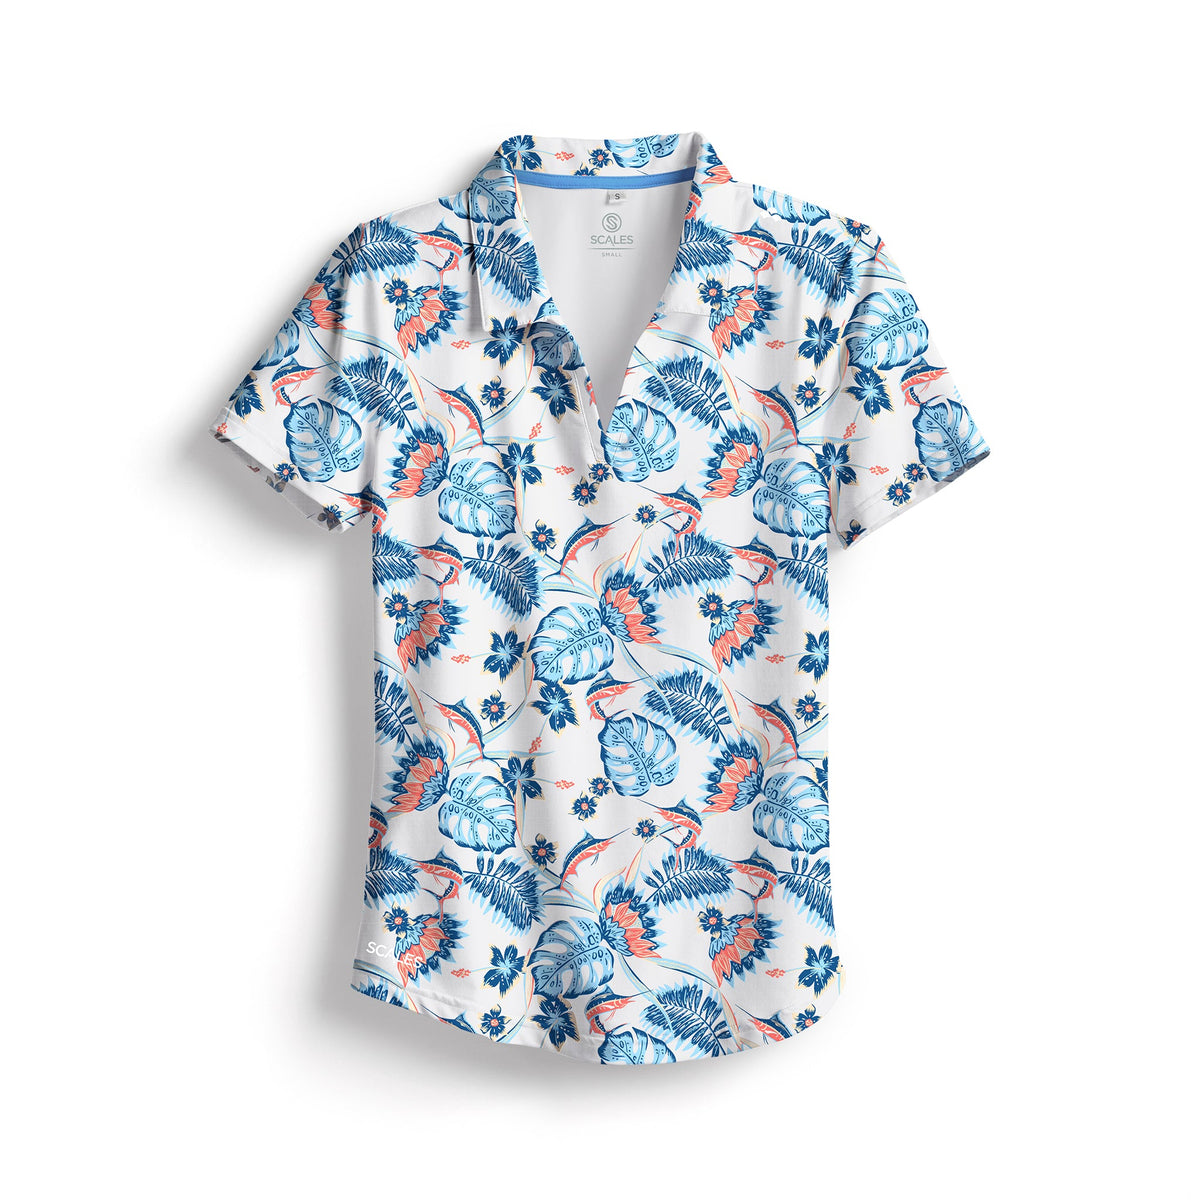 SCALES Tropic Star Womens Polo